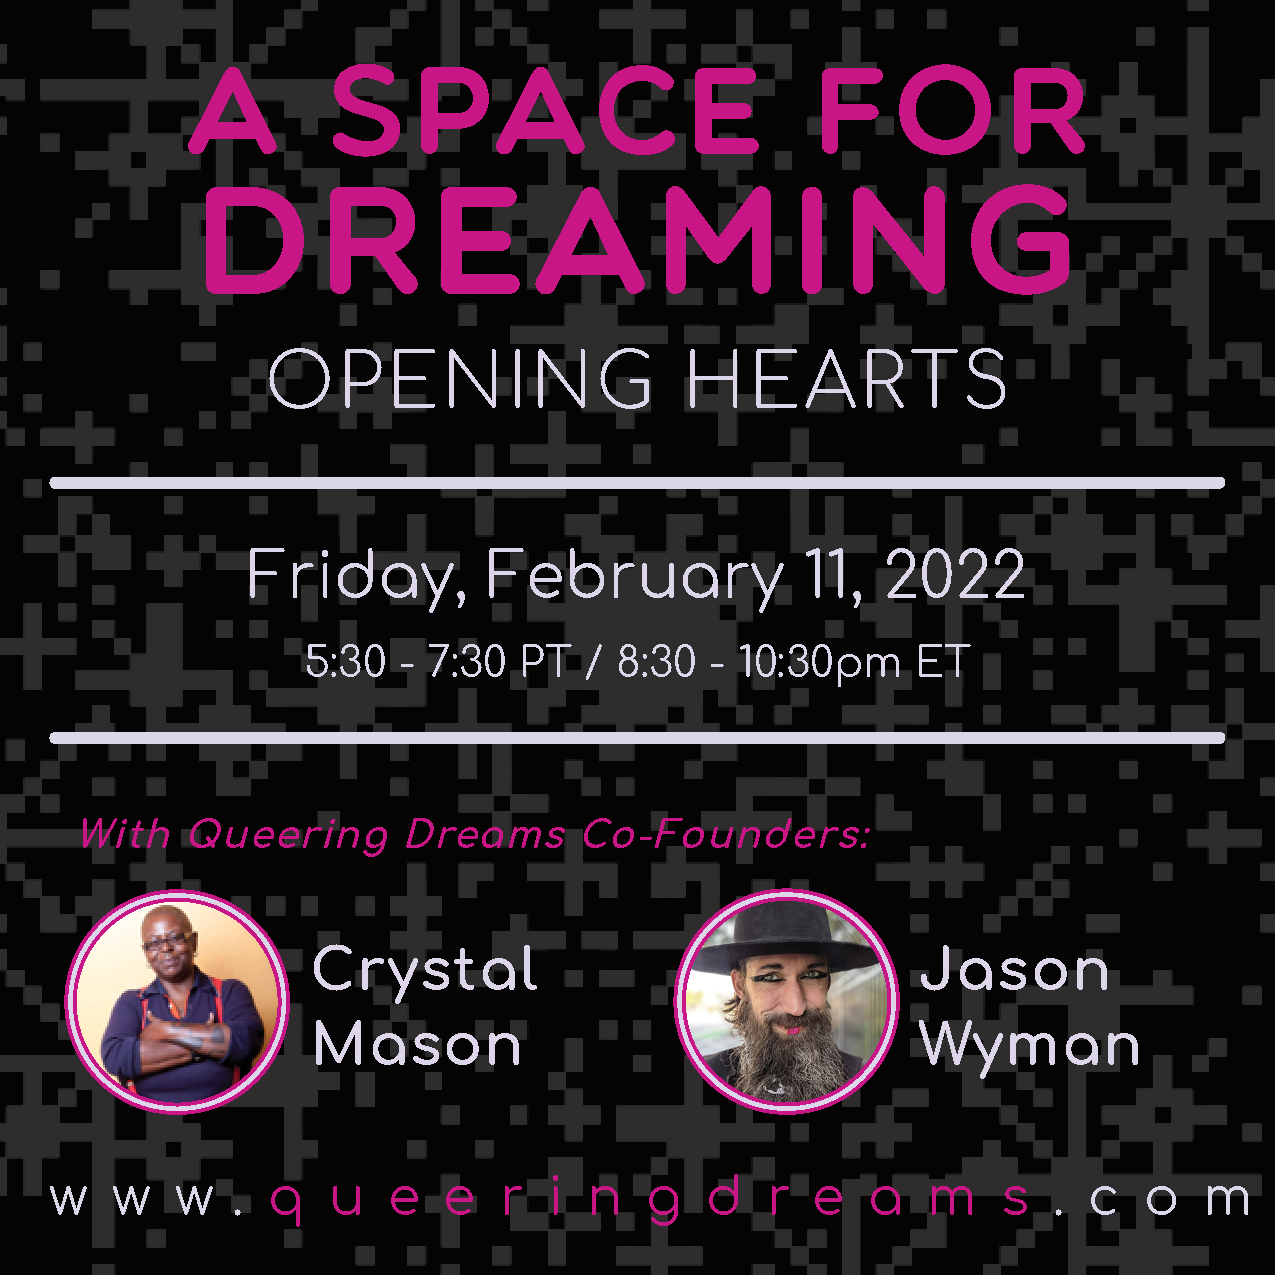 It reads, "A Space for Dreaming Opening Hearts, Friday, February 11,  2022, 5:30 to 7:30pm PT /  8:30 to 10:30pm ET, with Queering Dreams Co-Founders Crystal Mason & Jason Wyman. It is set against a black and dark gray pixelated background. There is a headshot of Crystal, a Black, fat, queer artist and Jason Wyman, a white, queer, anti-binary artist. 